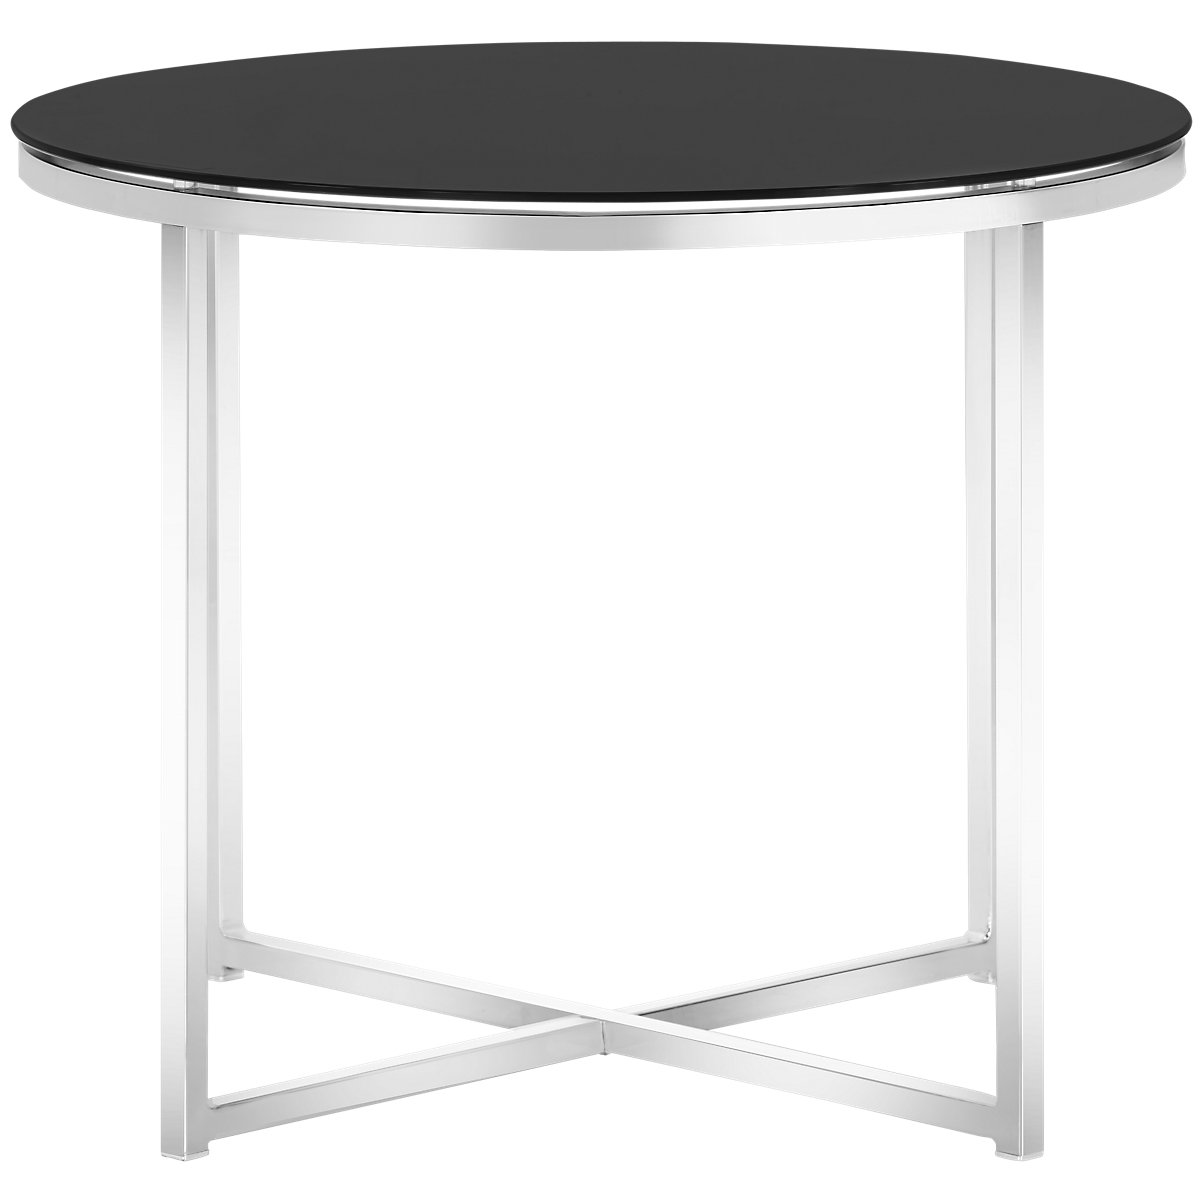 City Furniture: Kross Black Glass Round End Table